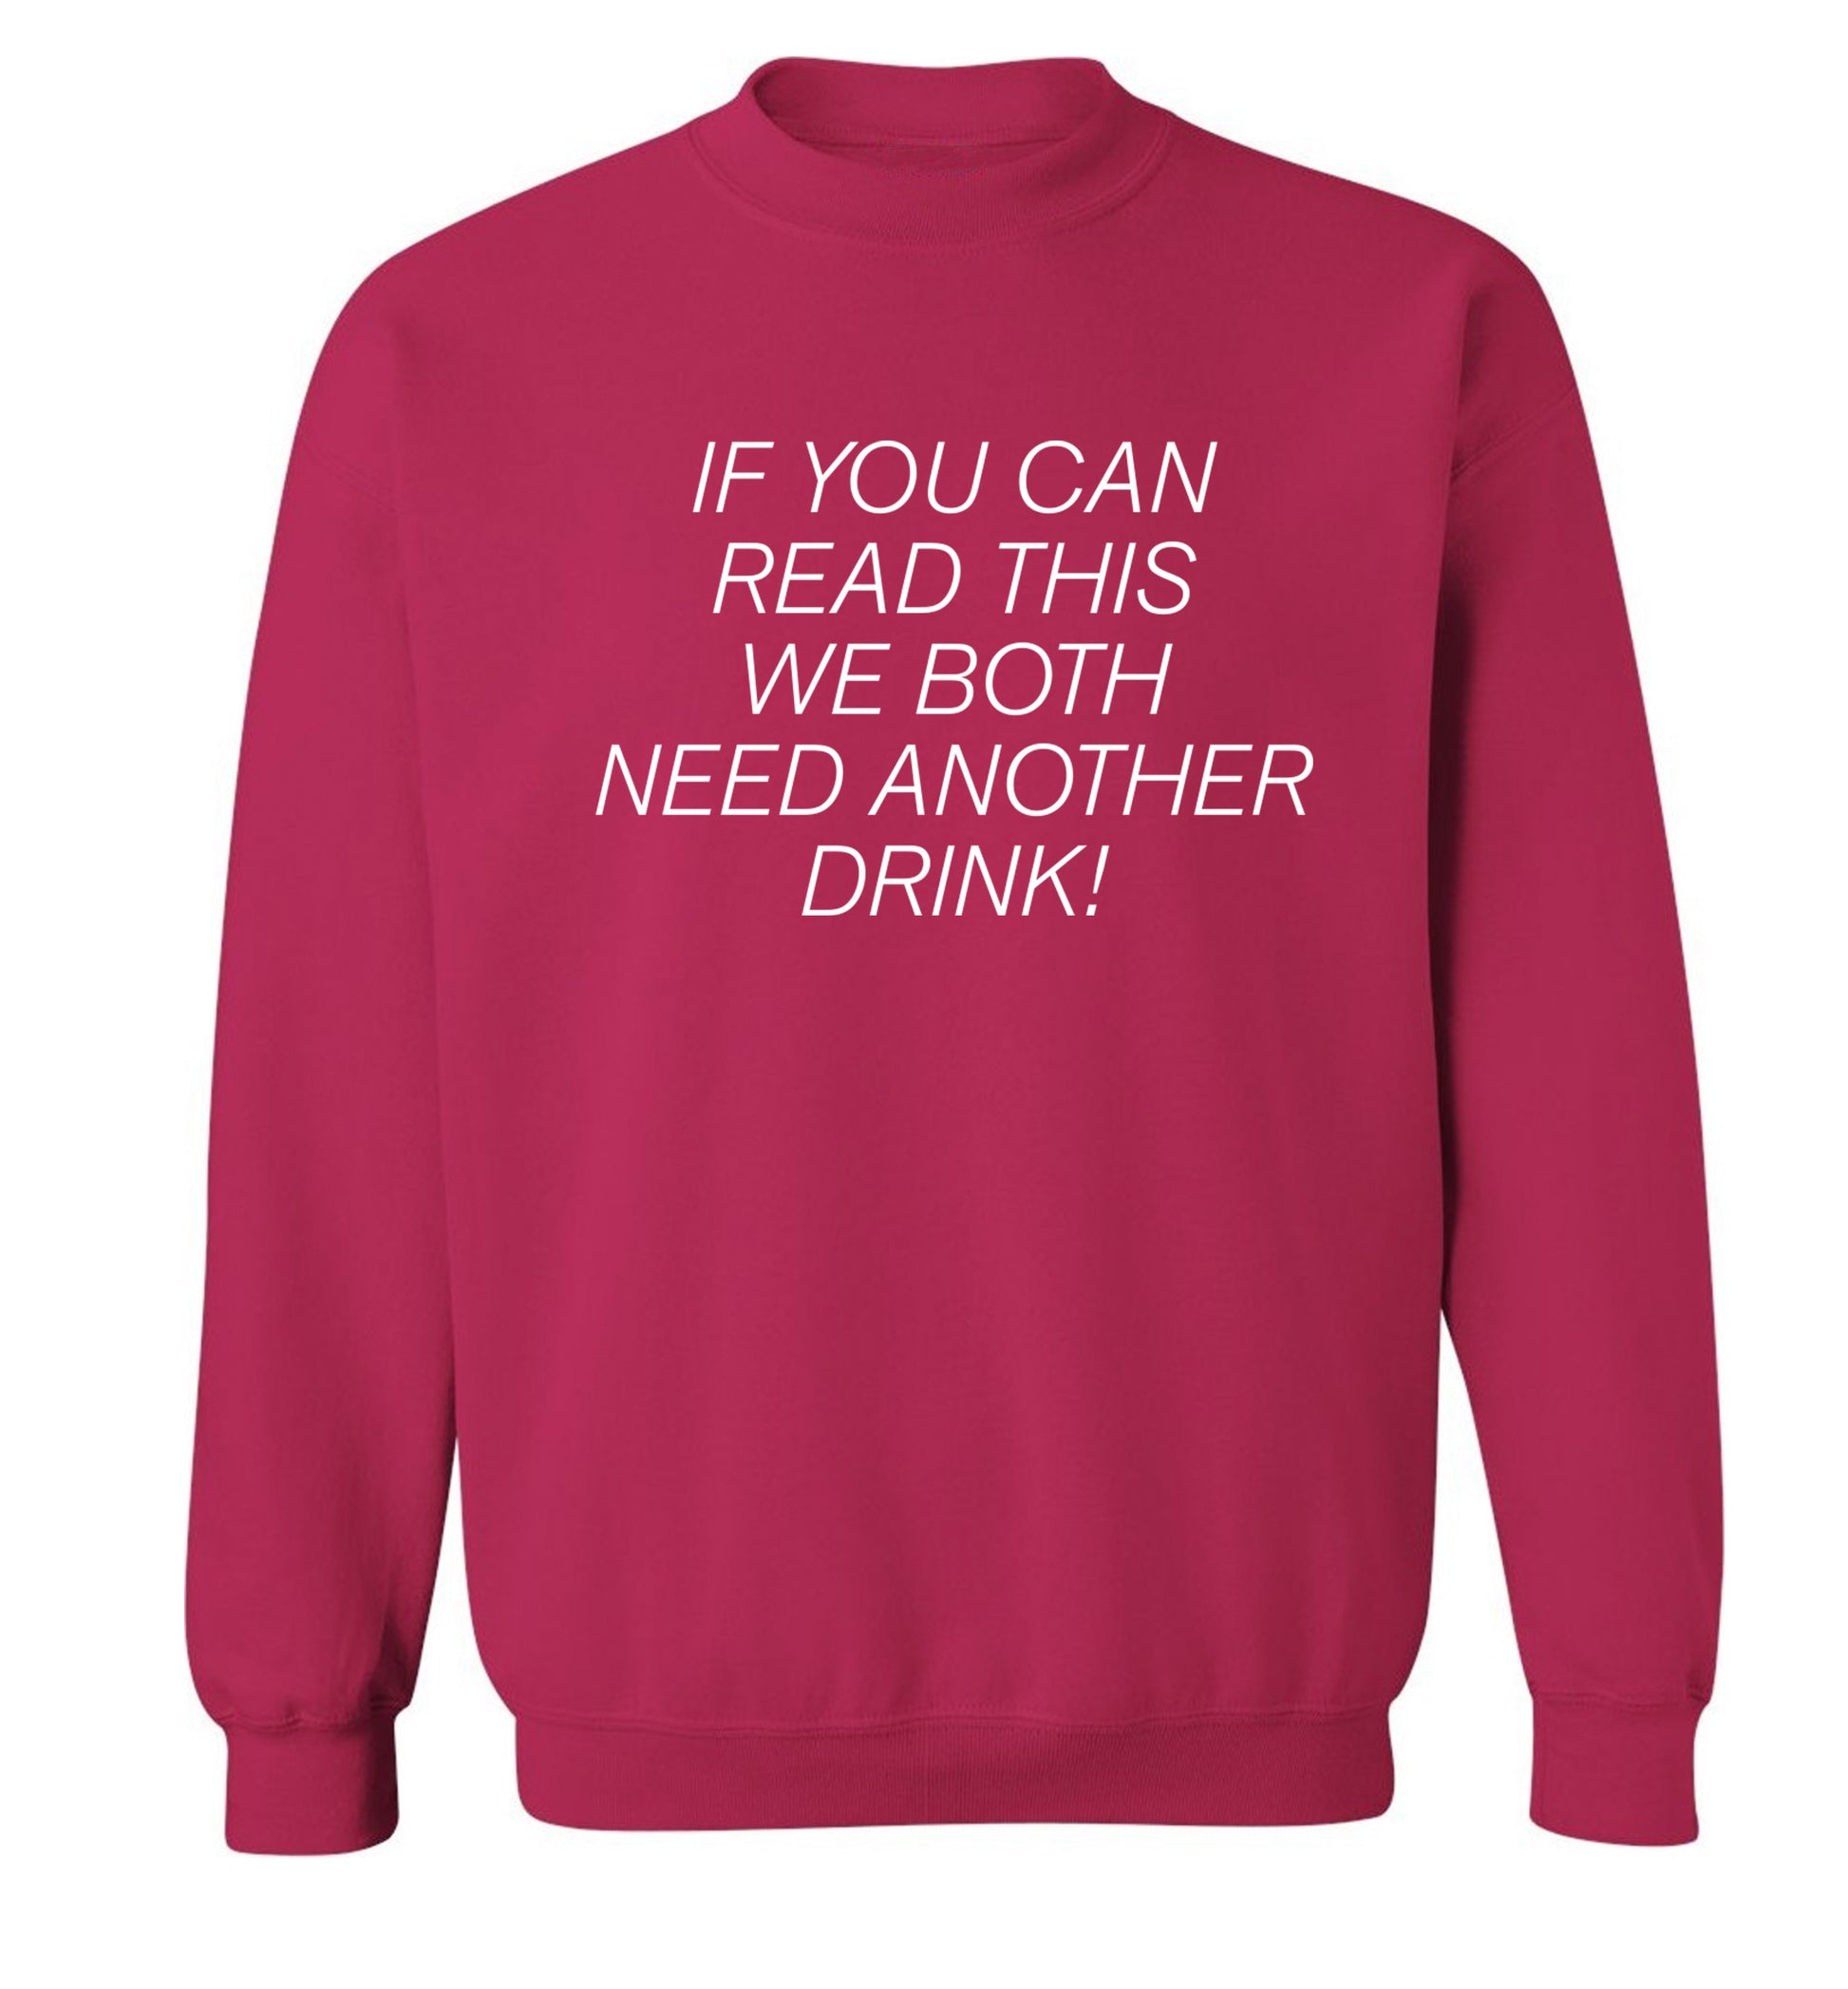 If you can read this we both need another drink! Adult's unisex pink Sweater 2XL